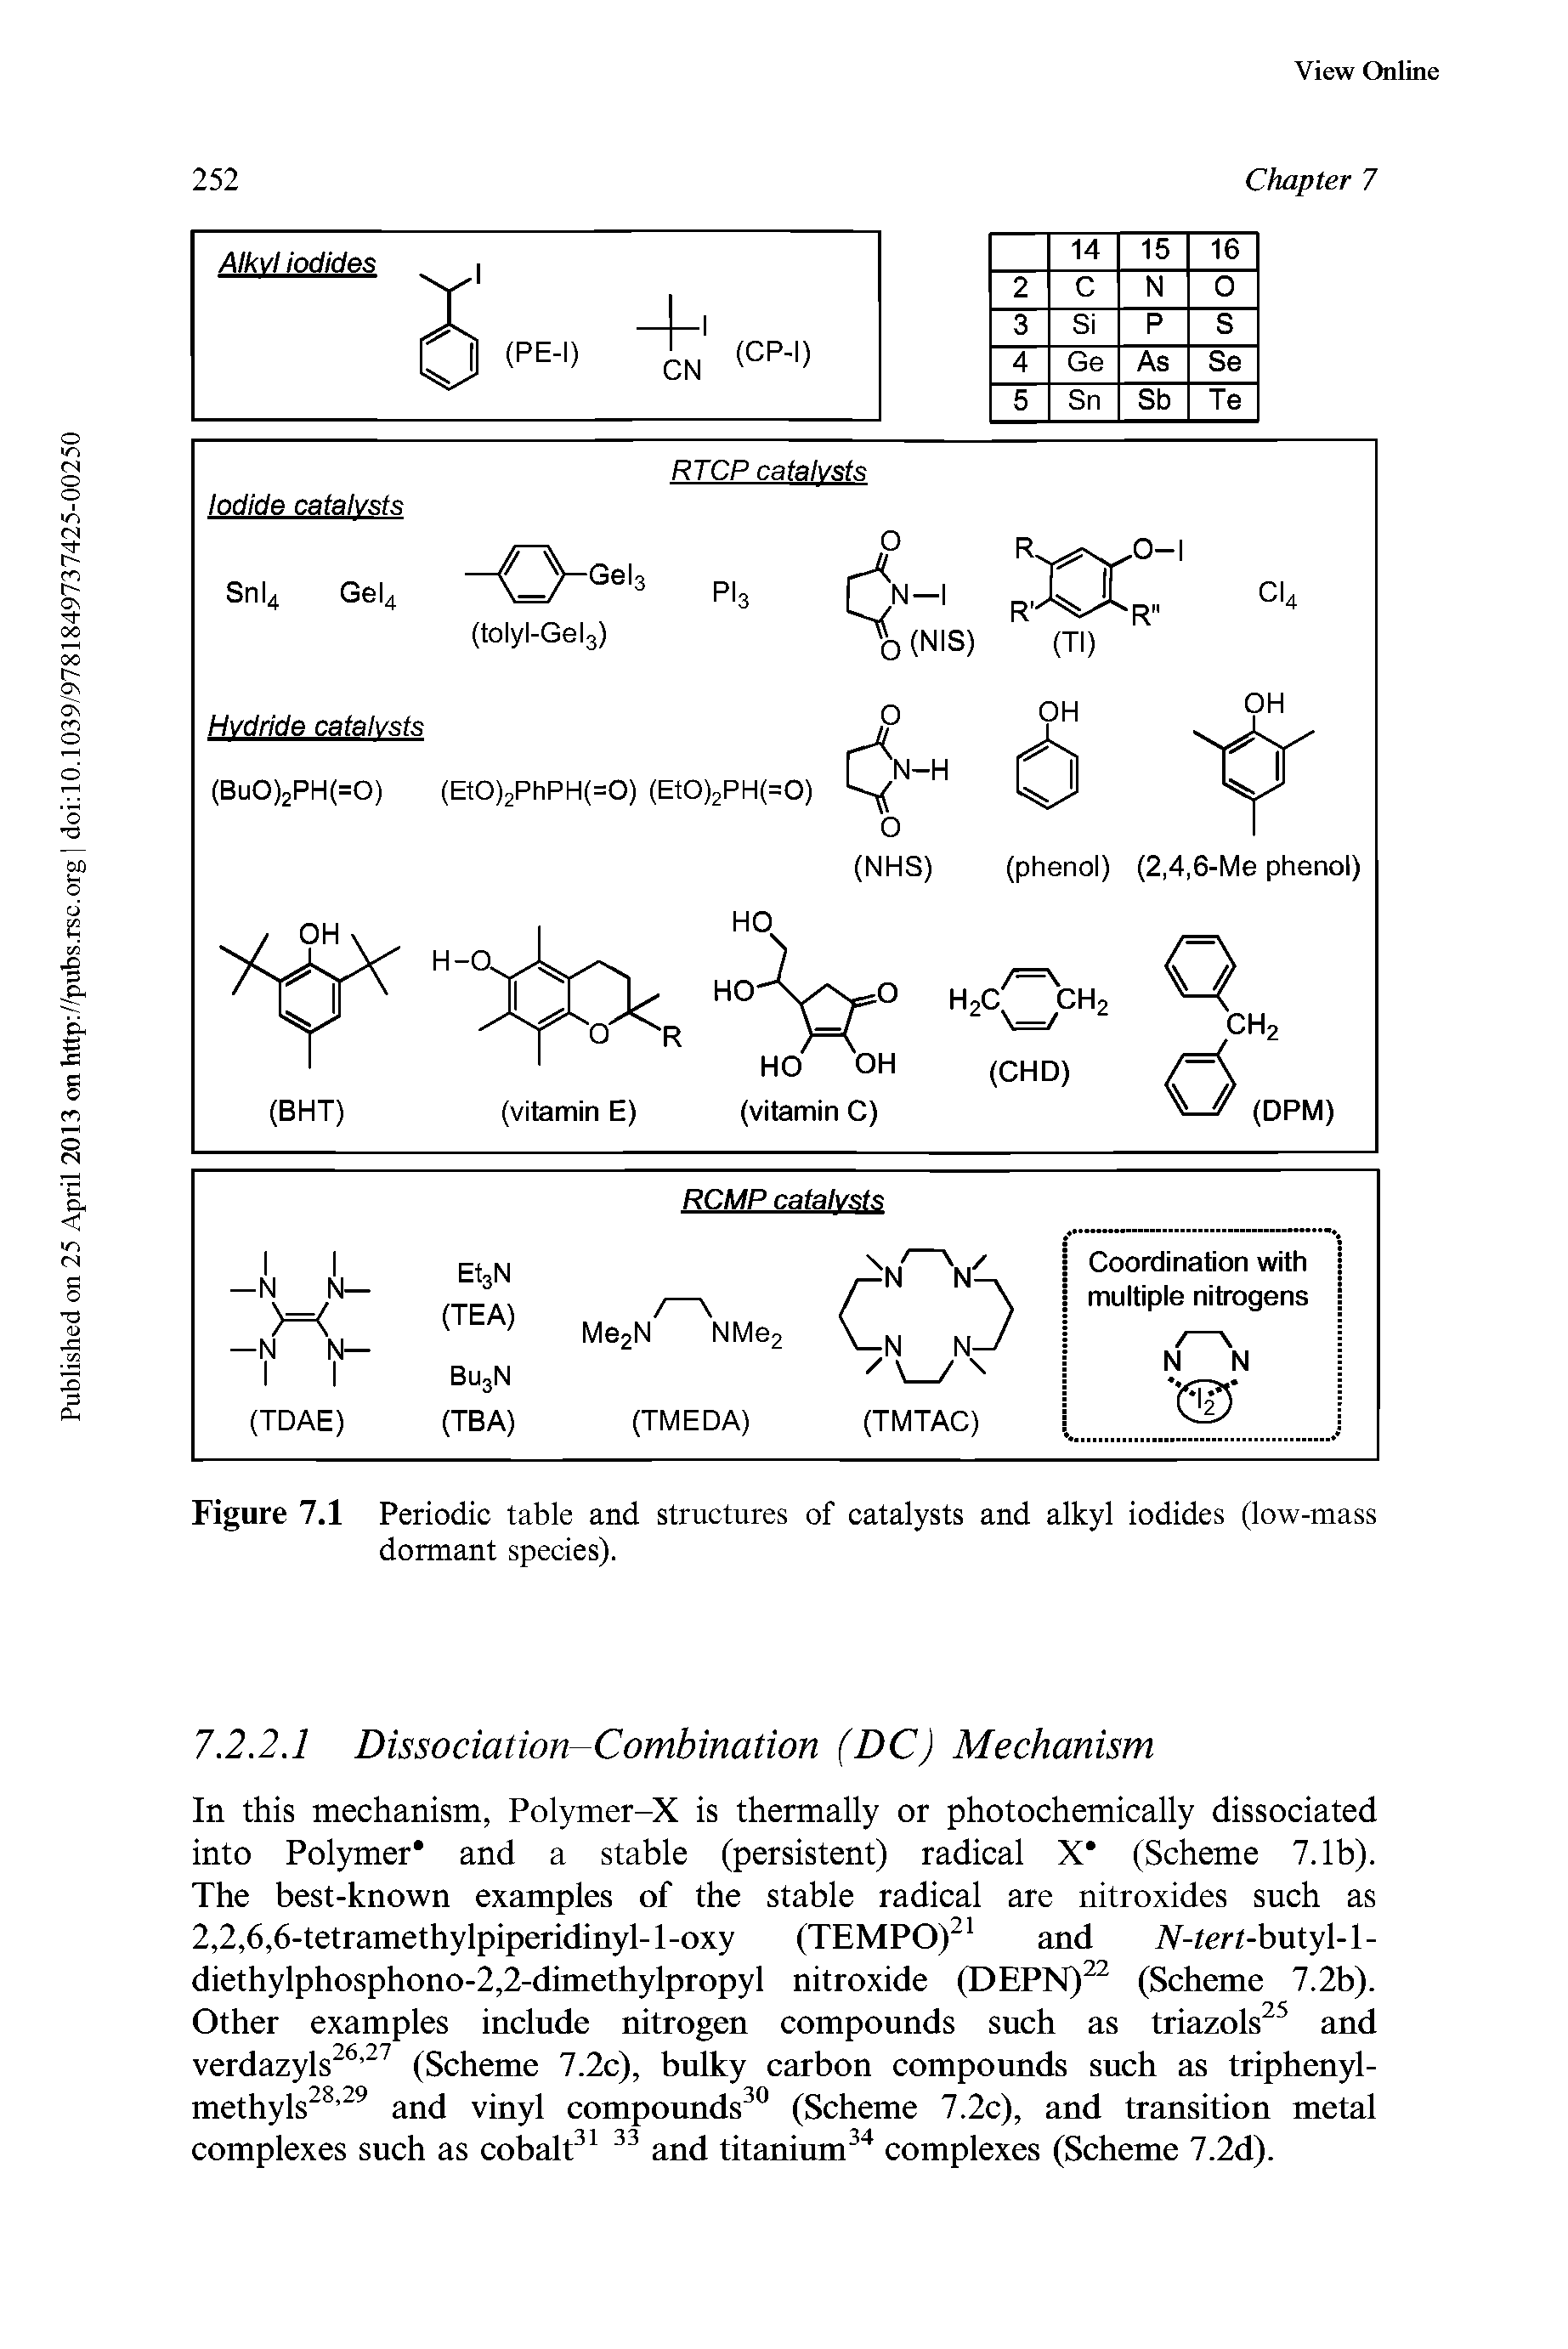 Figure 7.1 Periodic table and structures of catalysts and alkyl iodides (low-mass dormant species).